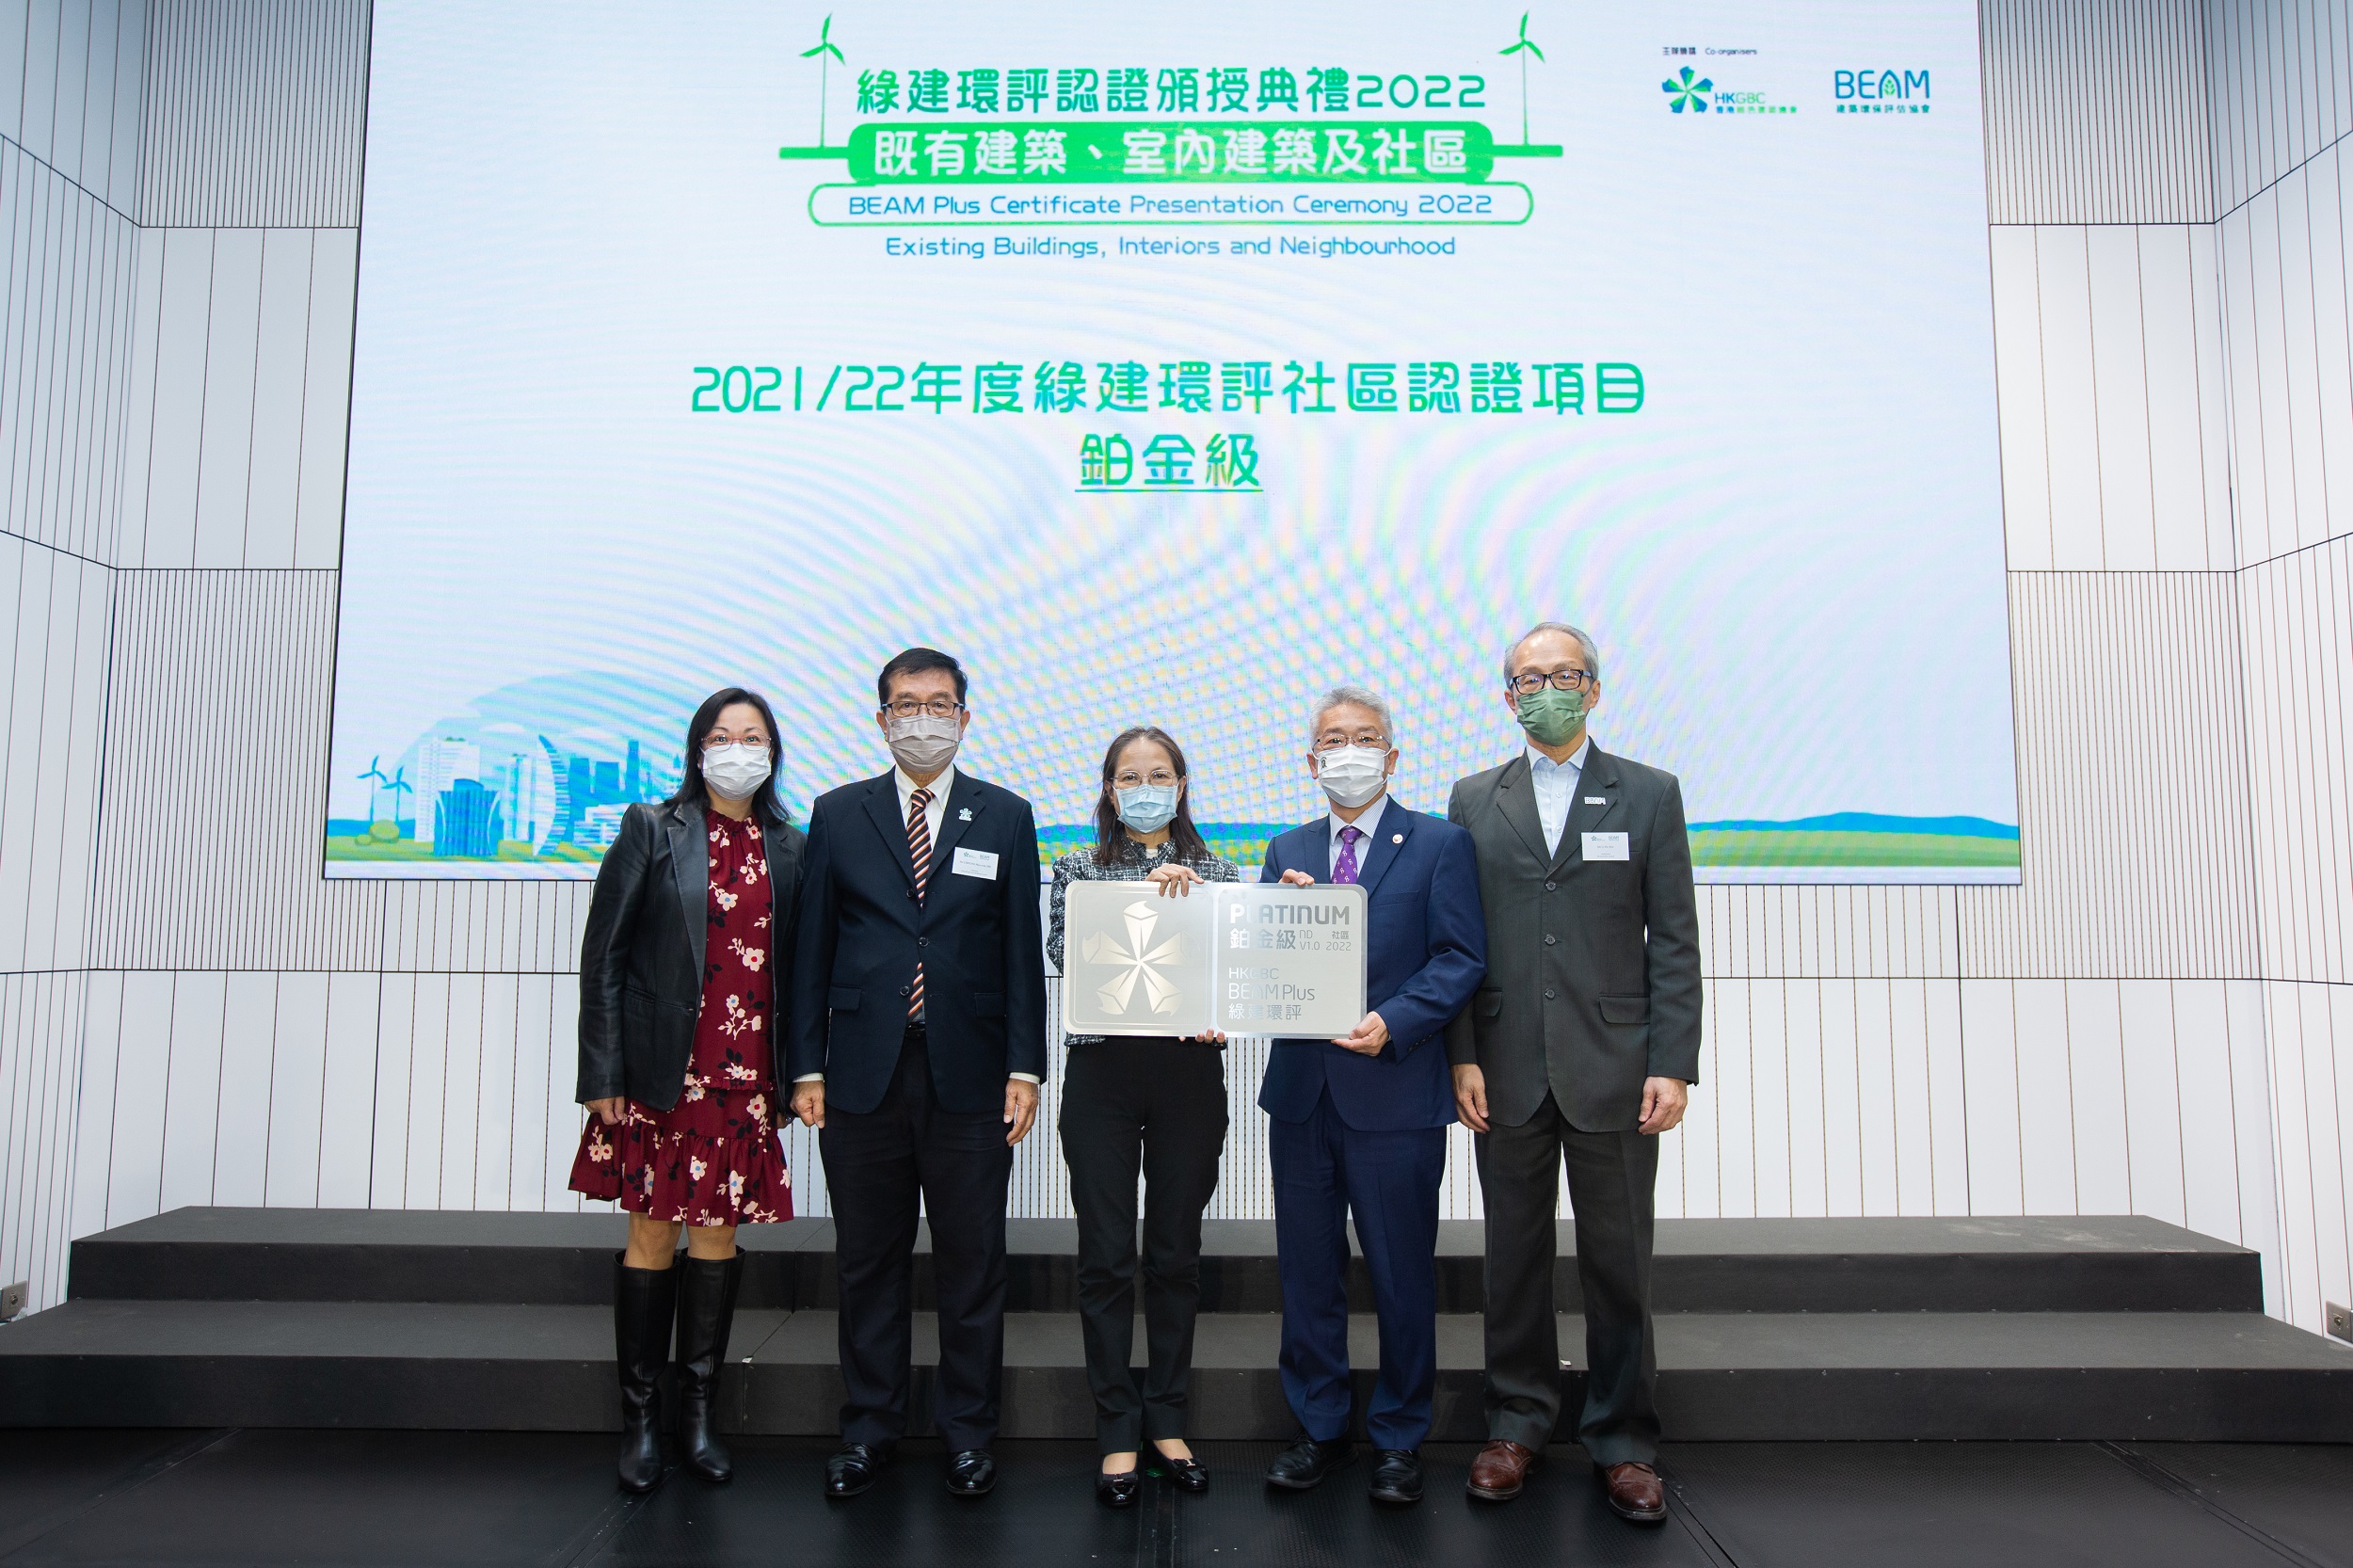 Hong Kong-Shenzhen Innovation and Technology Park has attained Platinum certificate at the BEAM Plus Neighbourhood Version 1.0 with the award